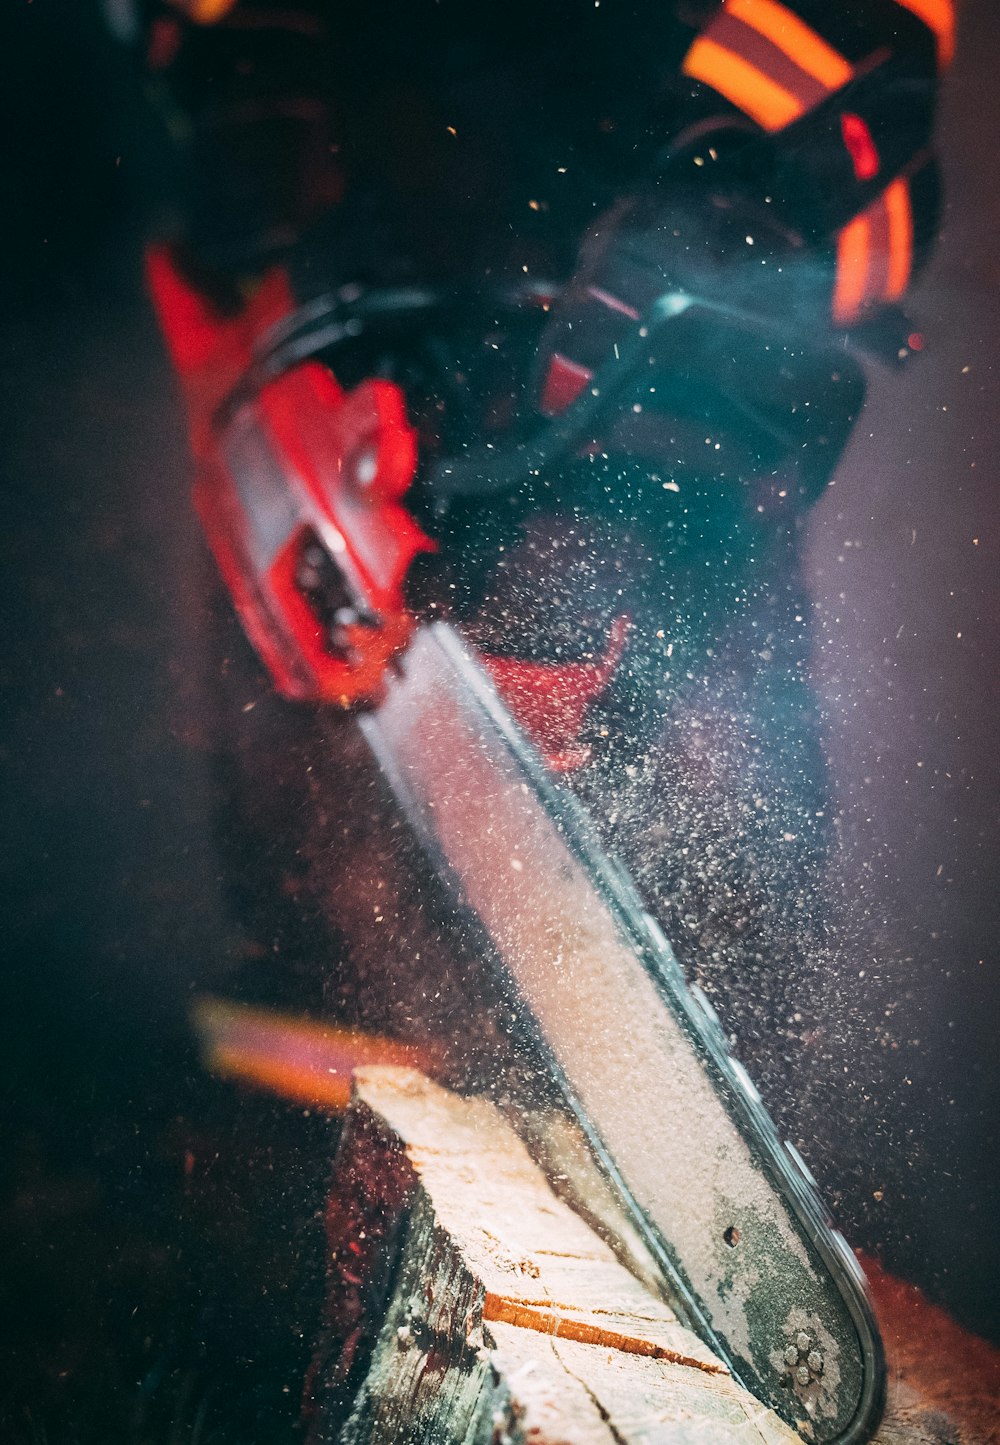 a close-up of a fire extinguisher